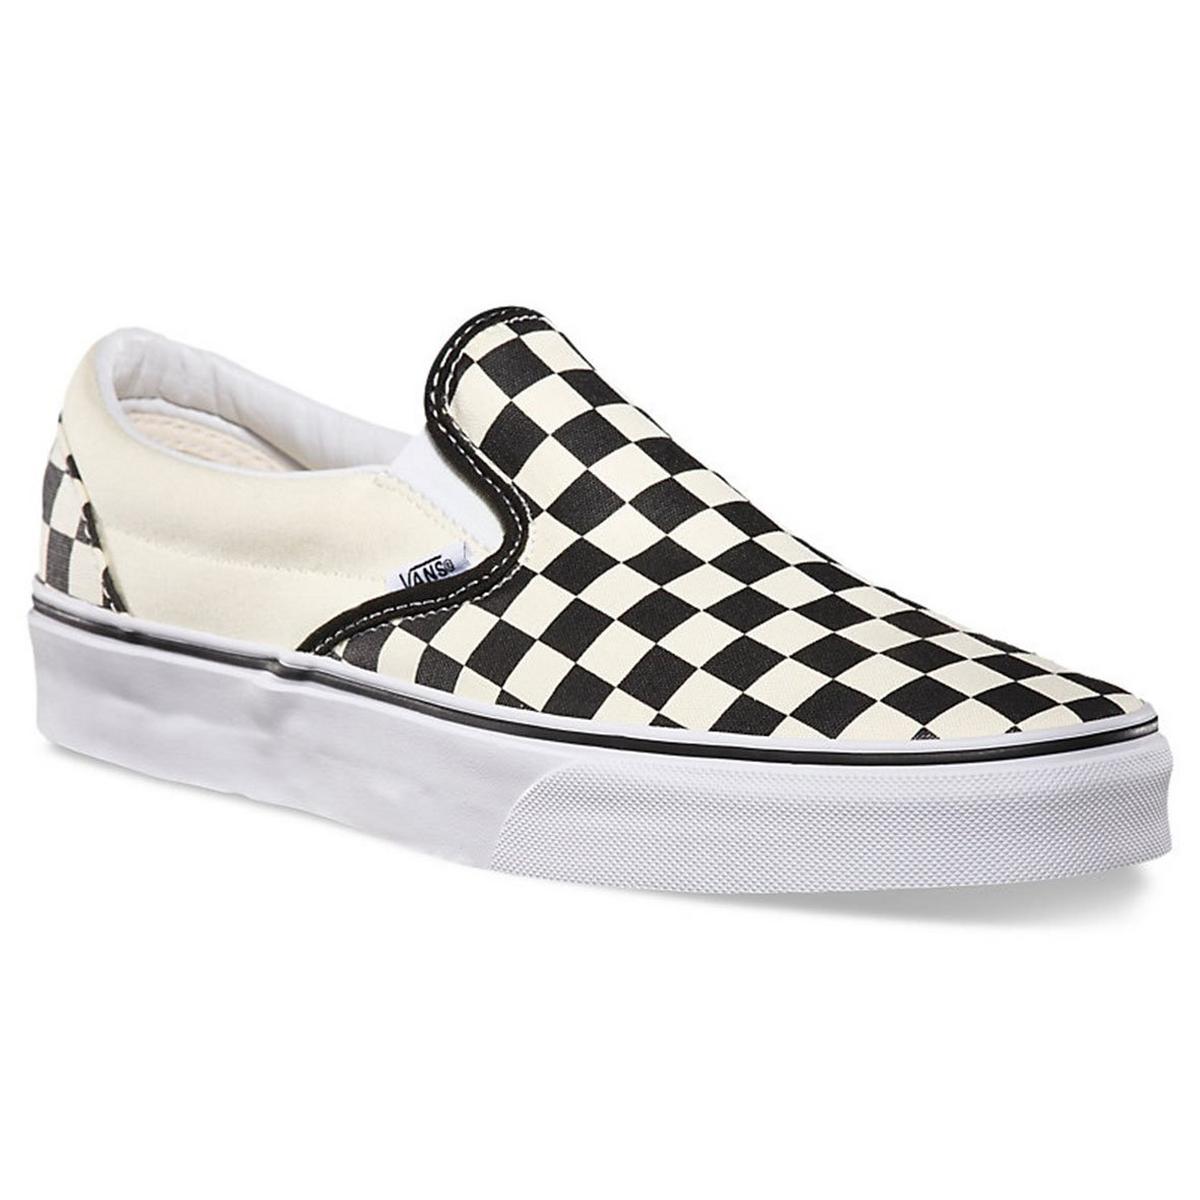 Chaussures Checkerboard Classic unisexe